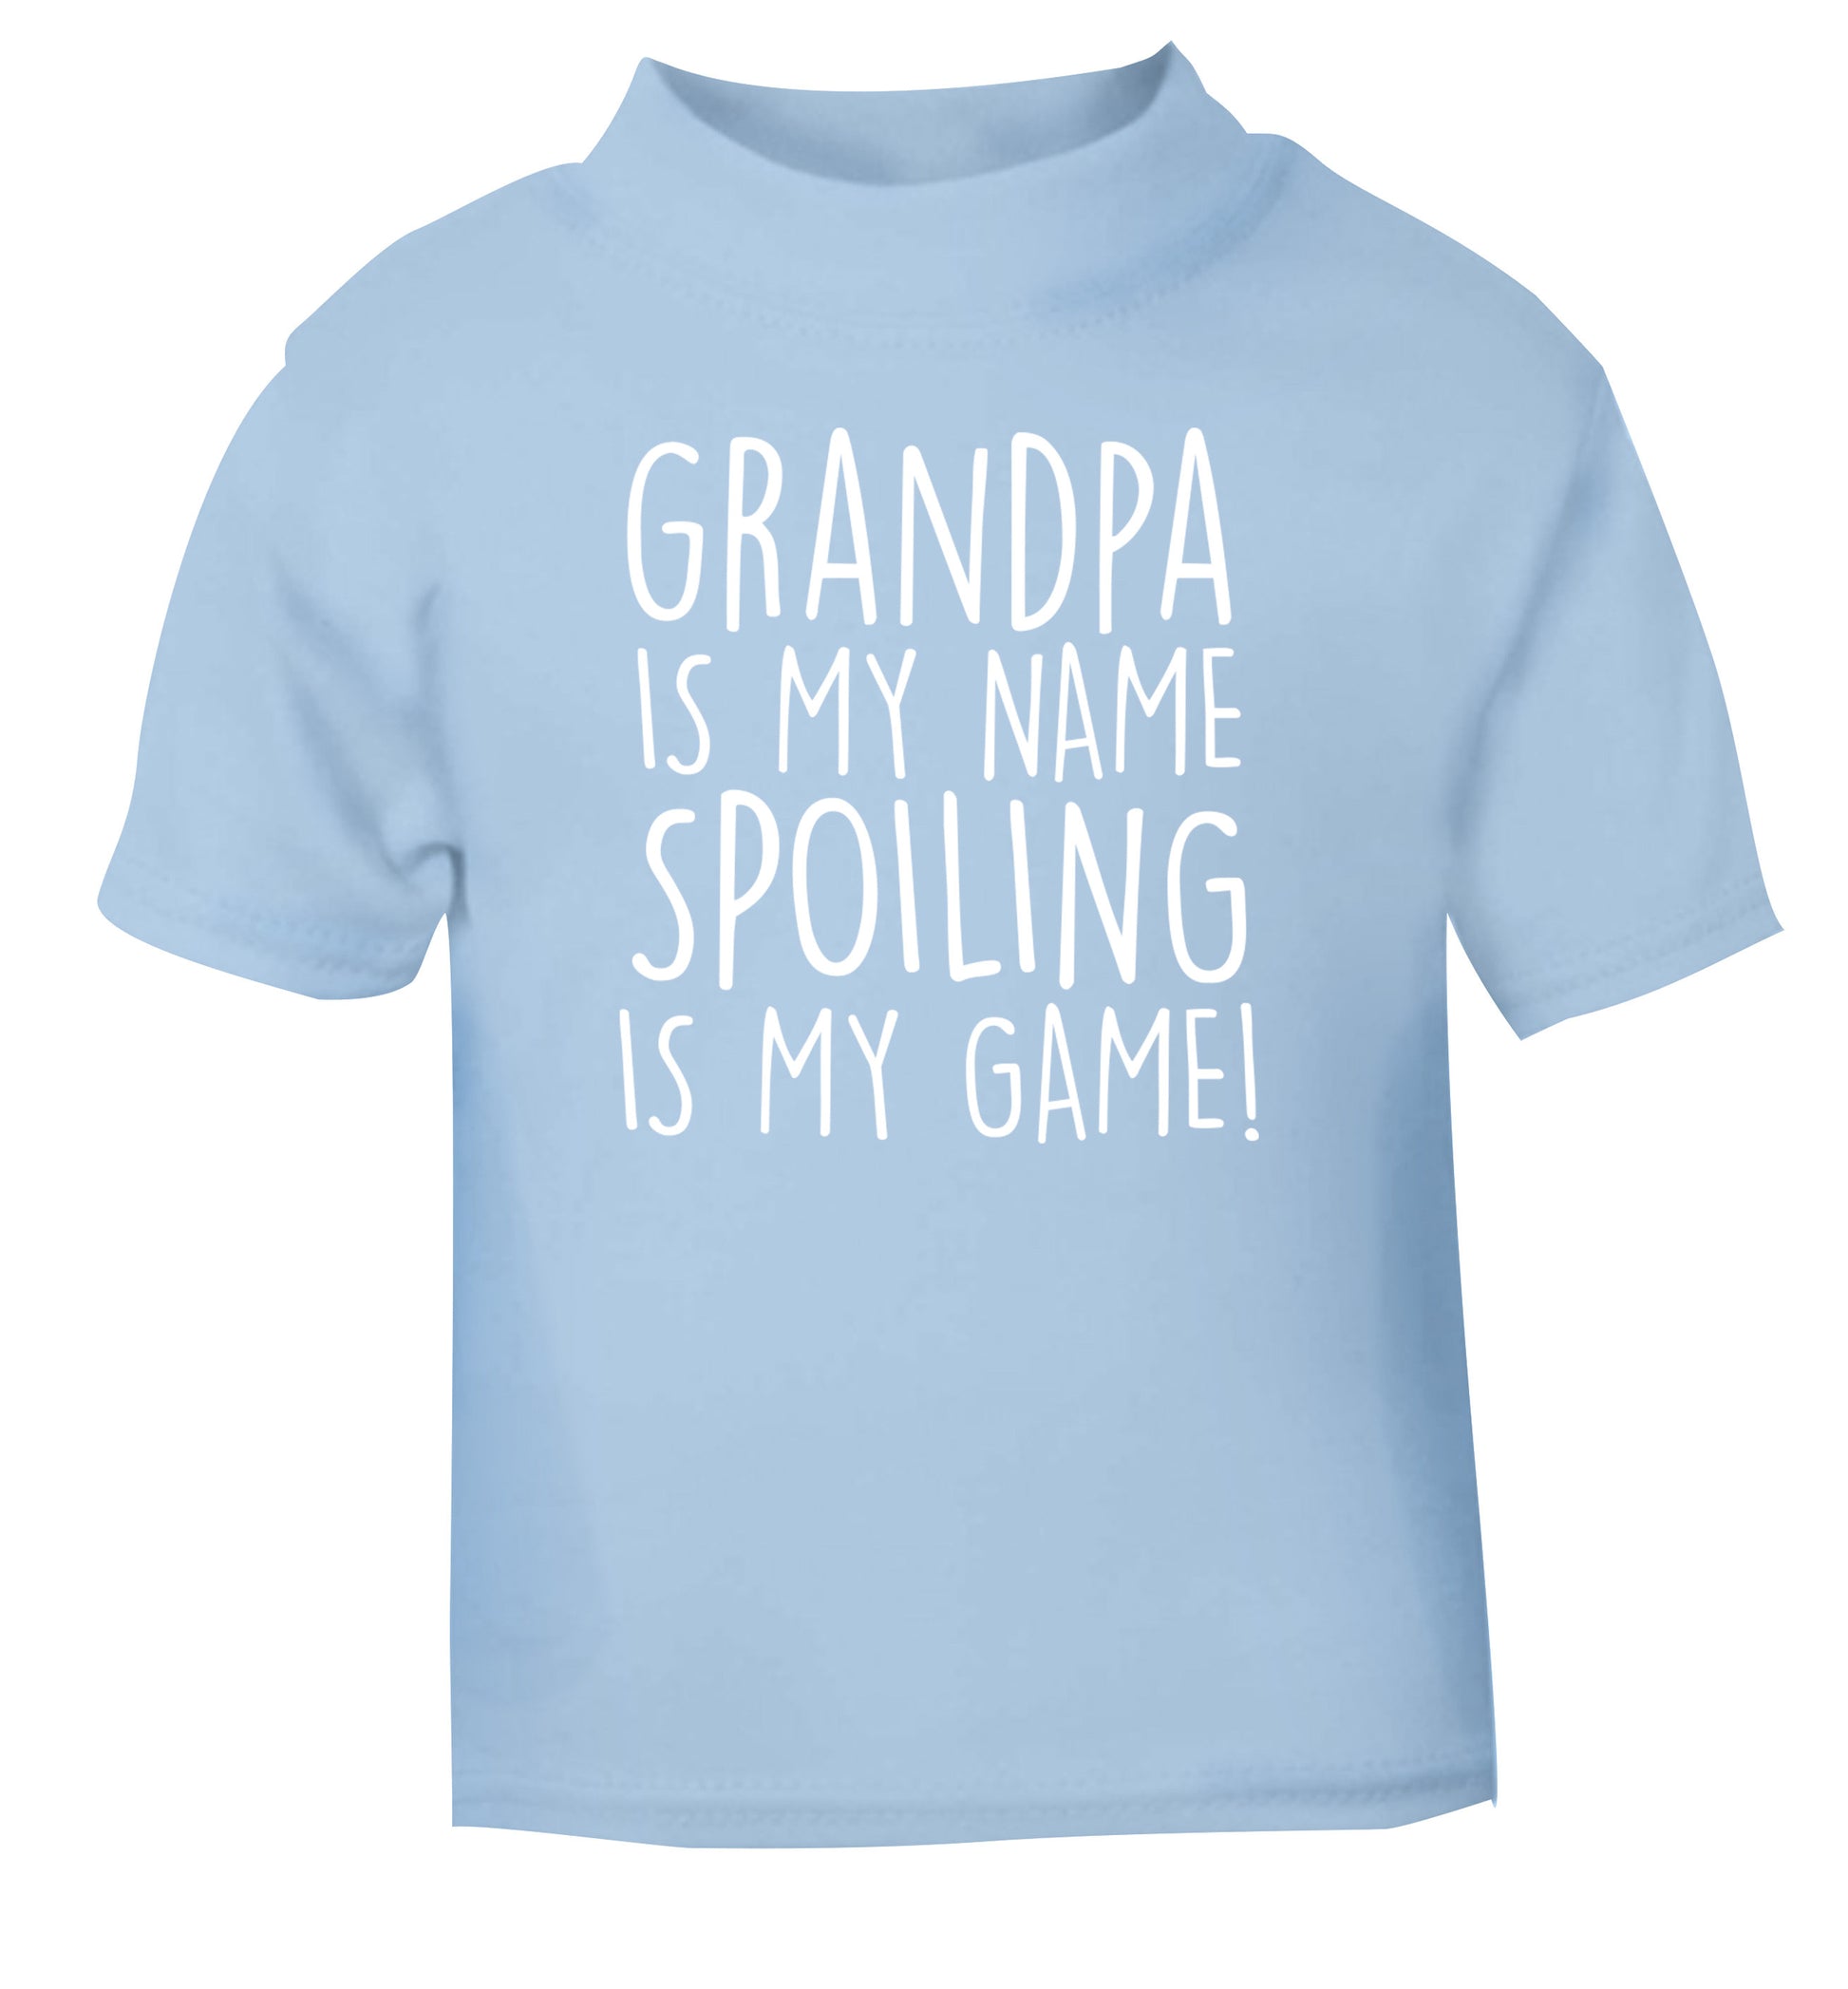 Grandpa is my name, spoiling is my game light blue Baby Toddler Tshirt 2 Years